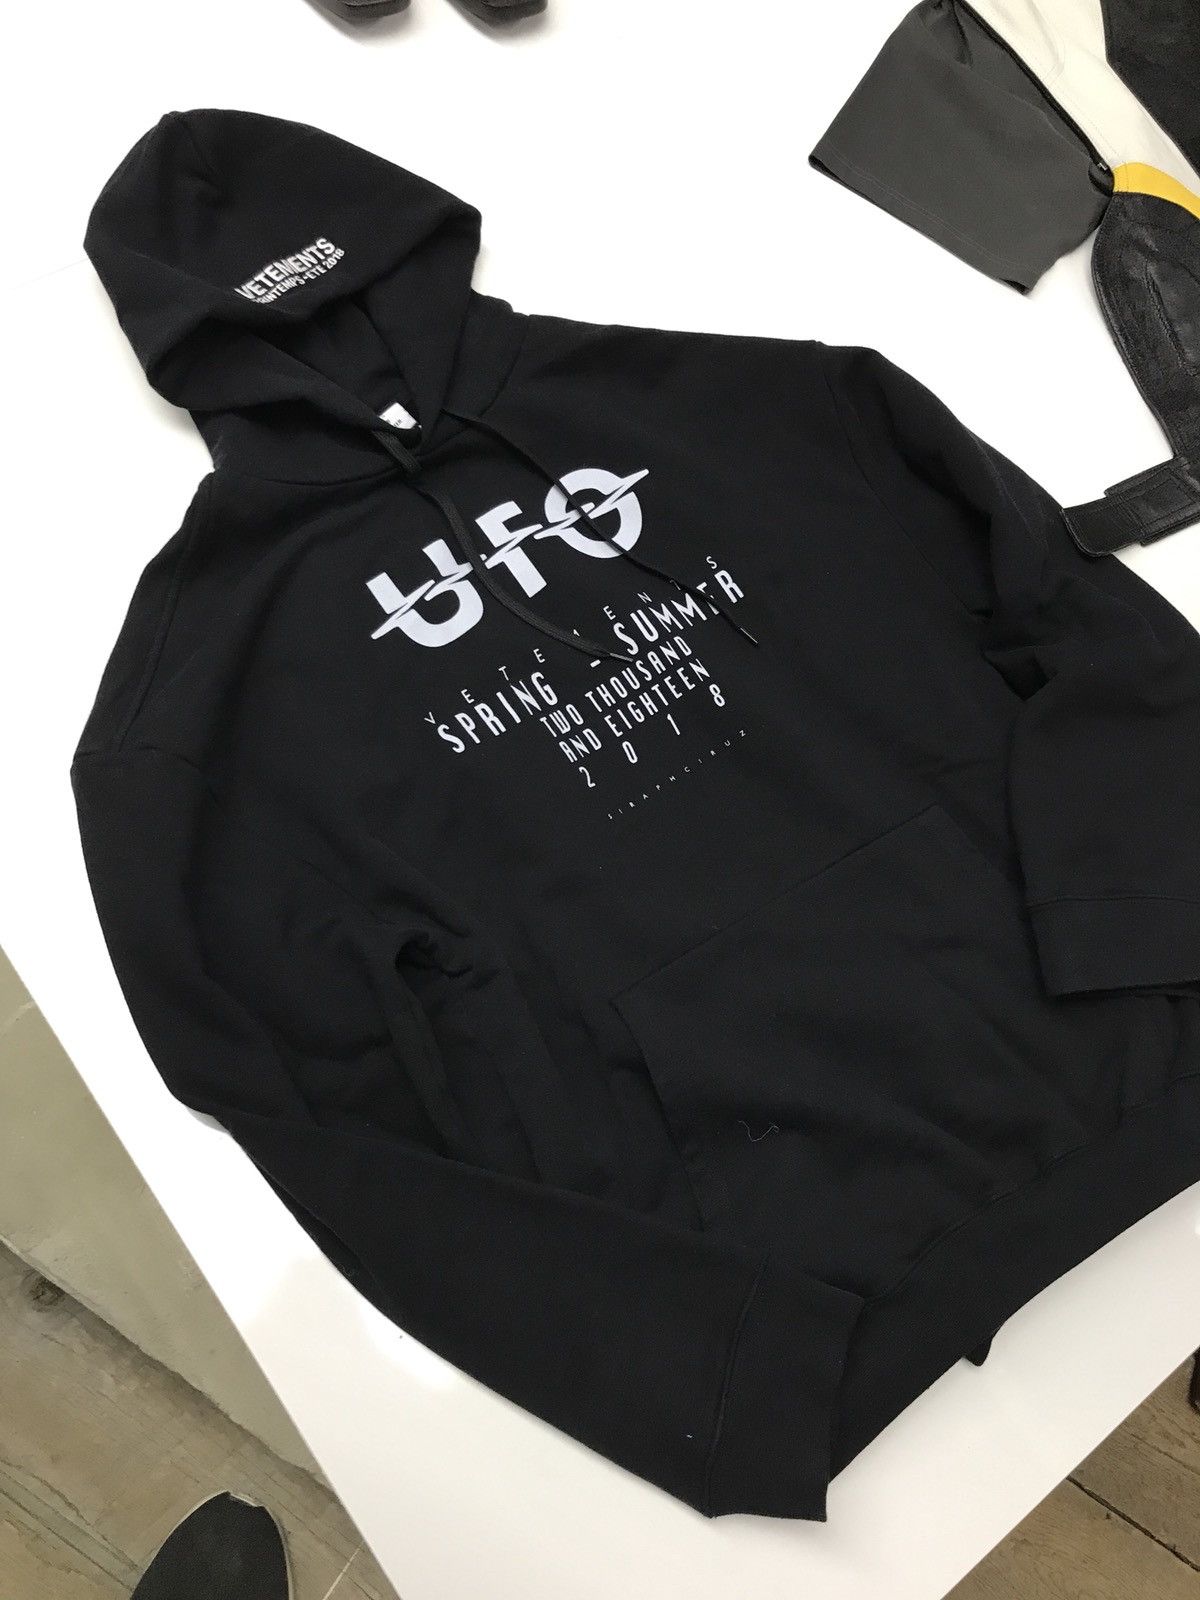 Vetements UFO HOODIE JAPAN LIMITED EDITION OF 50 PIECES | Grailed